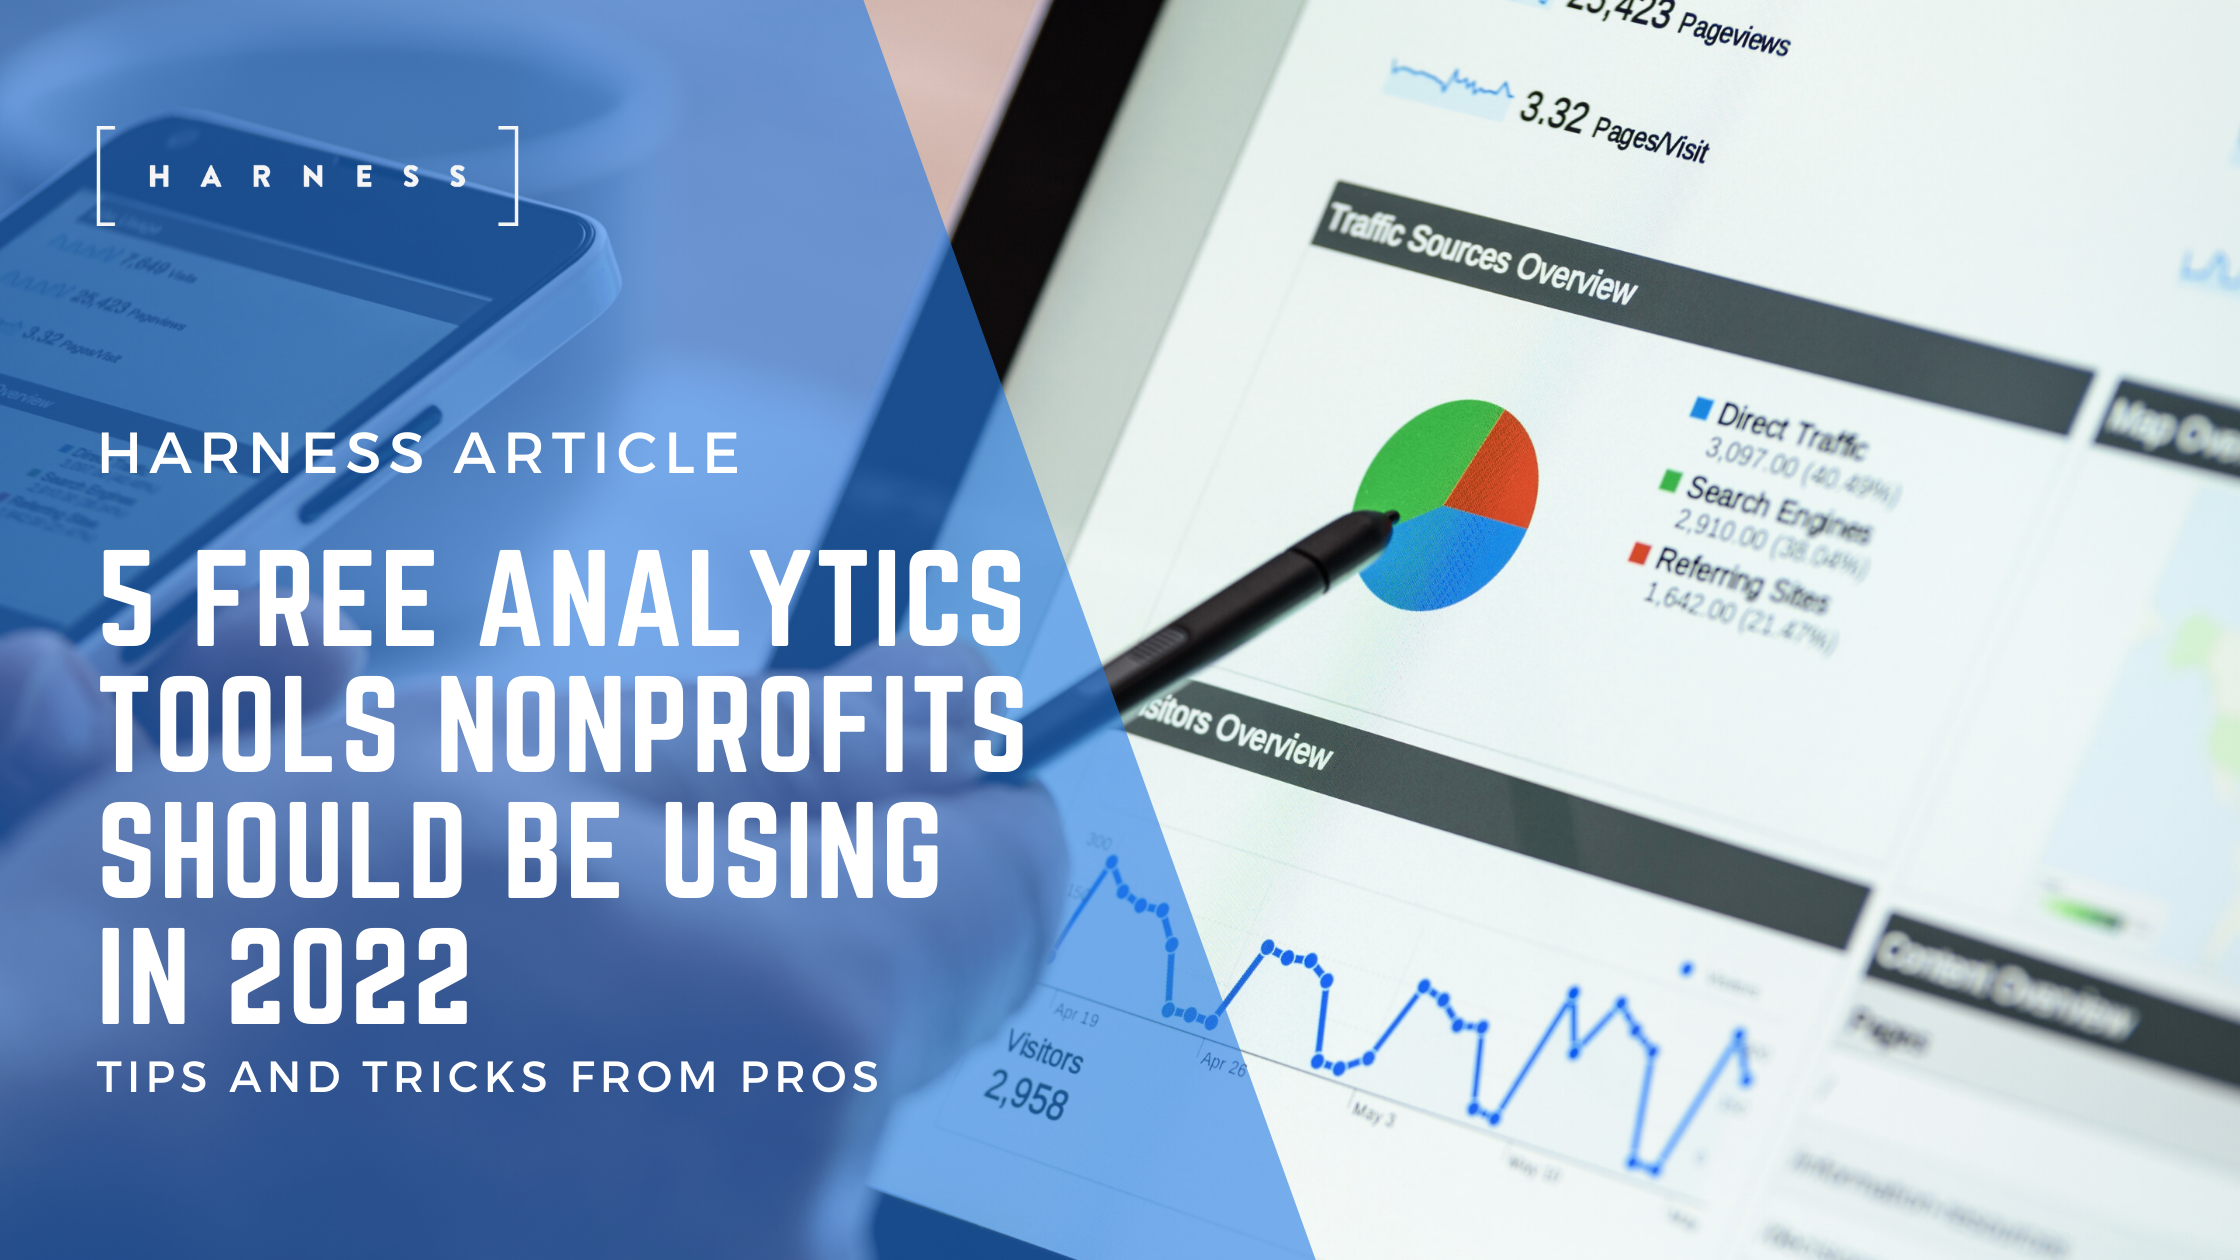 5 Free Analytics Tools Nonprofits Should Be Using in 2022